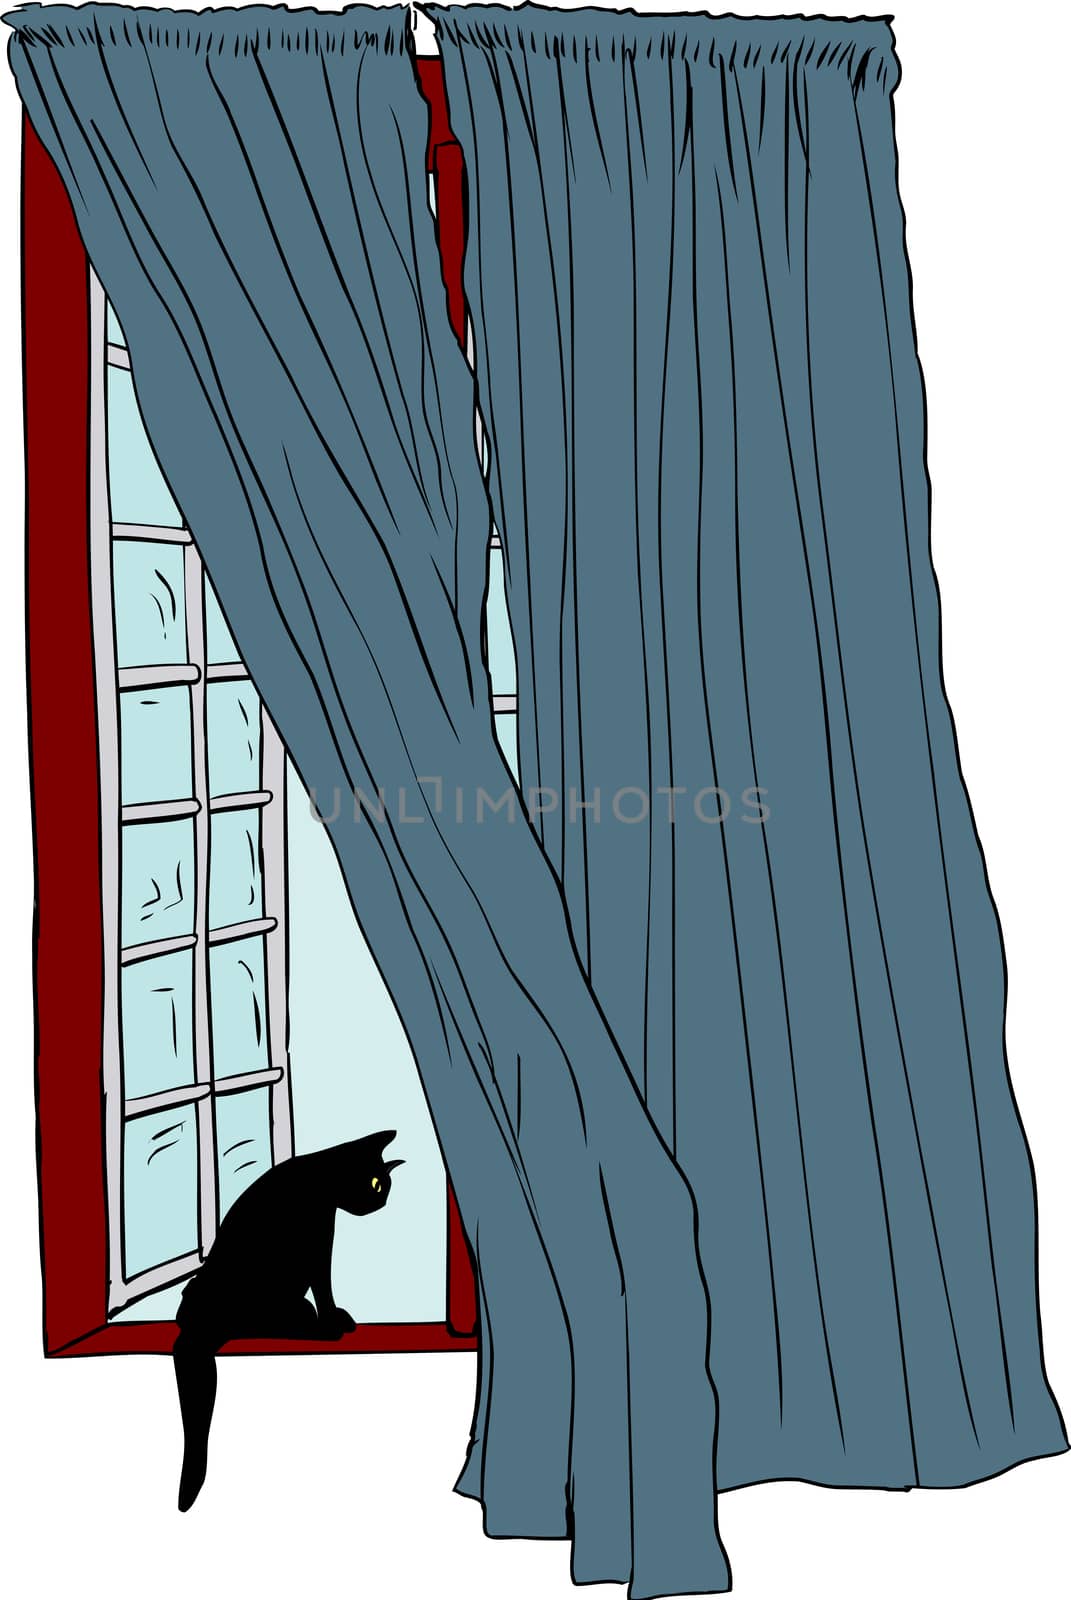 Open window with black cat on ledge by TheBlackRhino